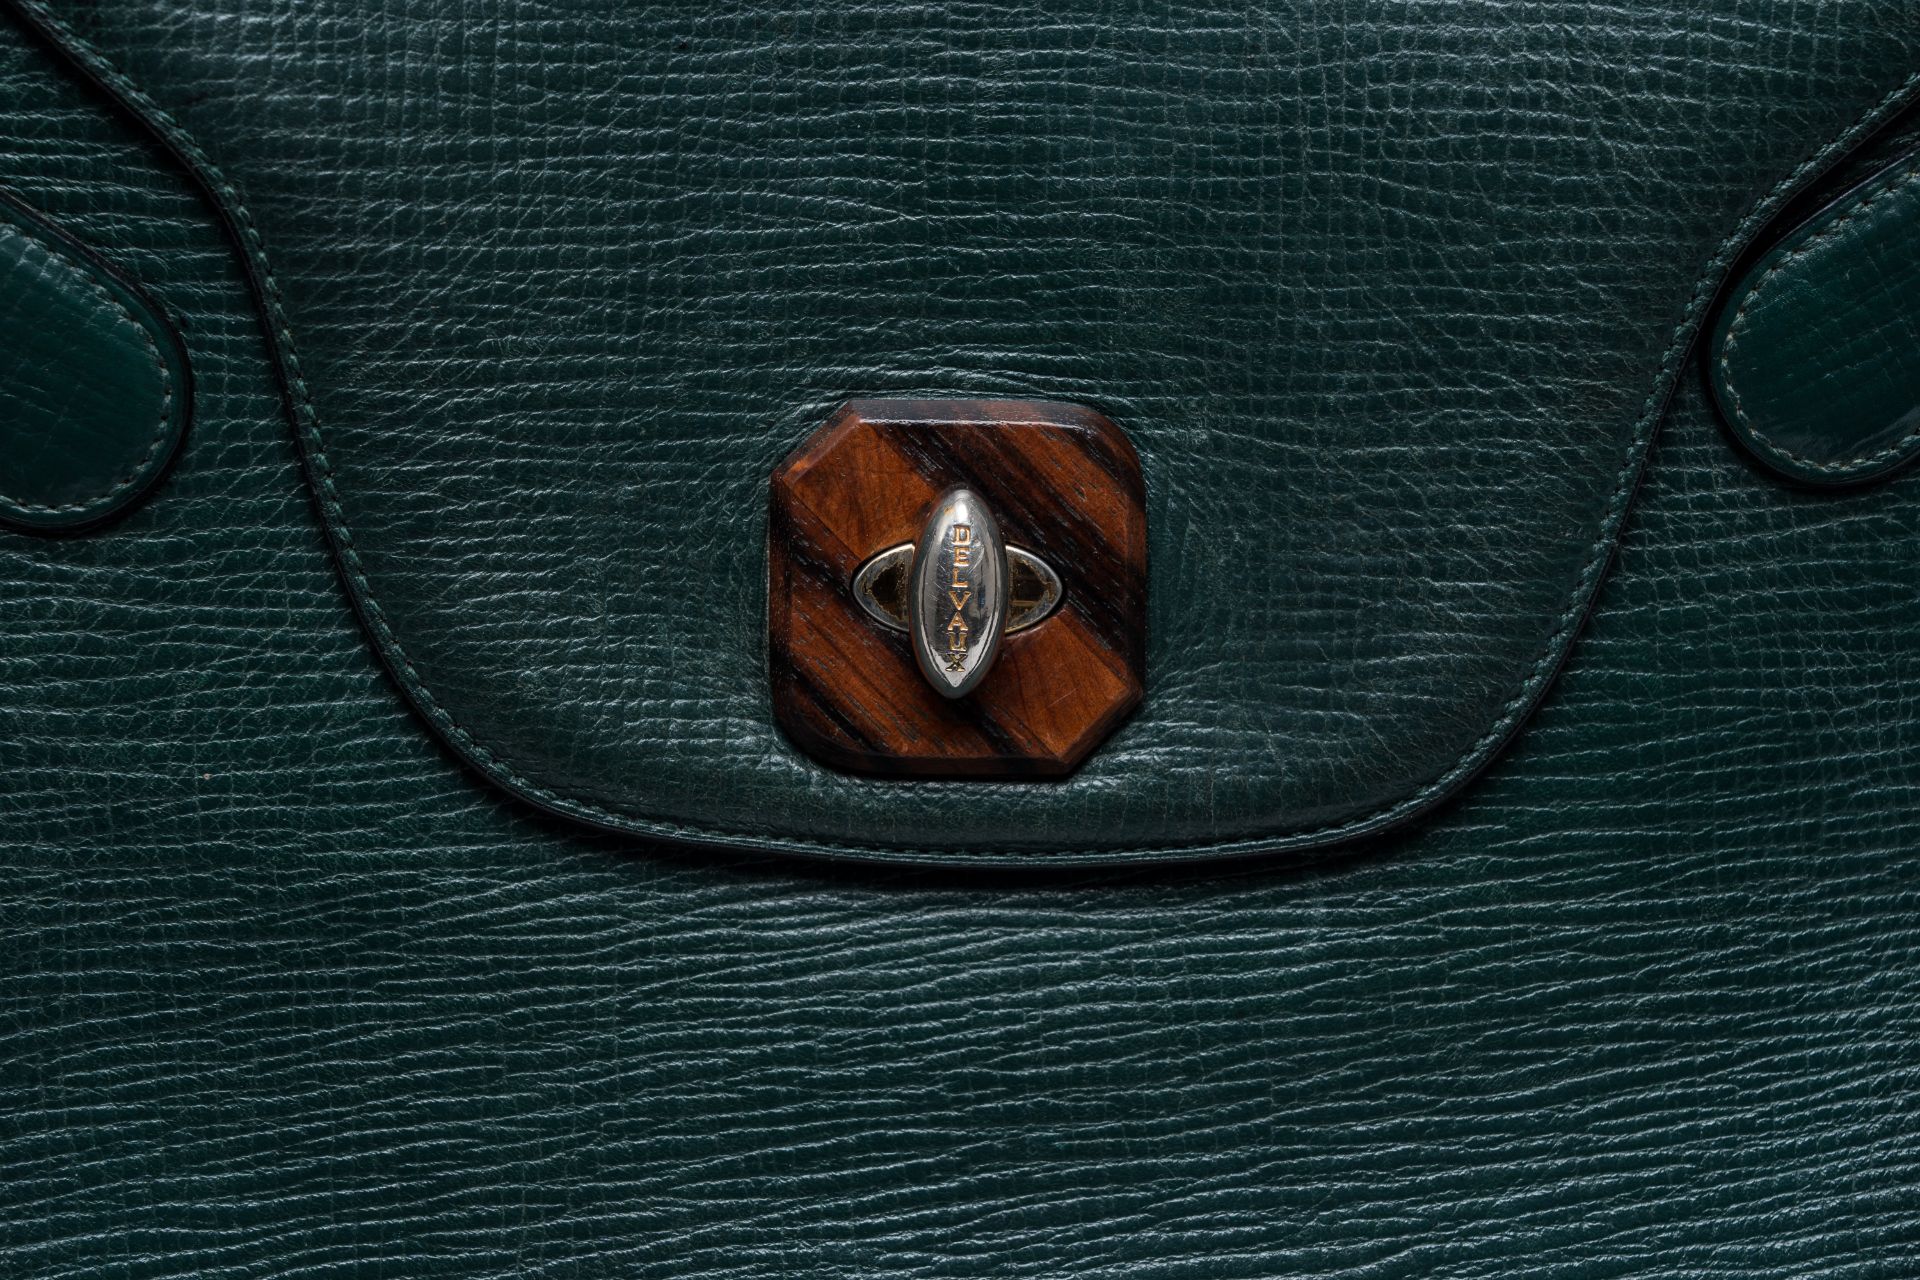 A Belgian green leather Delvaux shoulder bag with wood details, 20th C. - Image 9 of 12